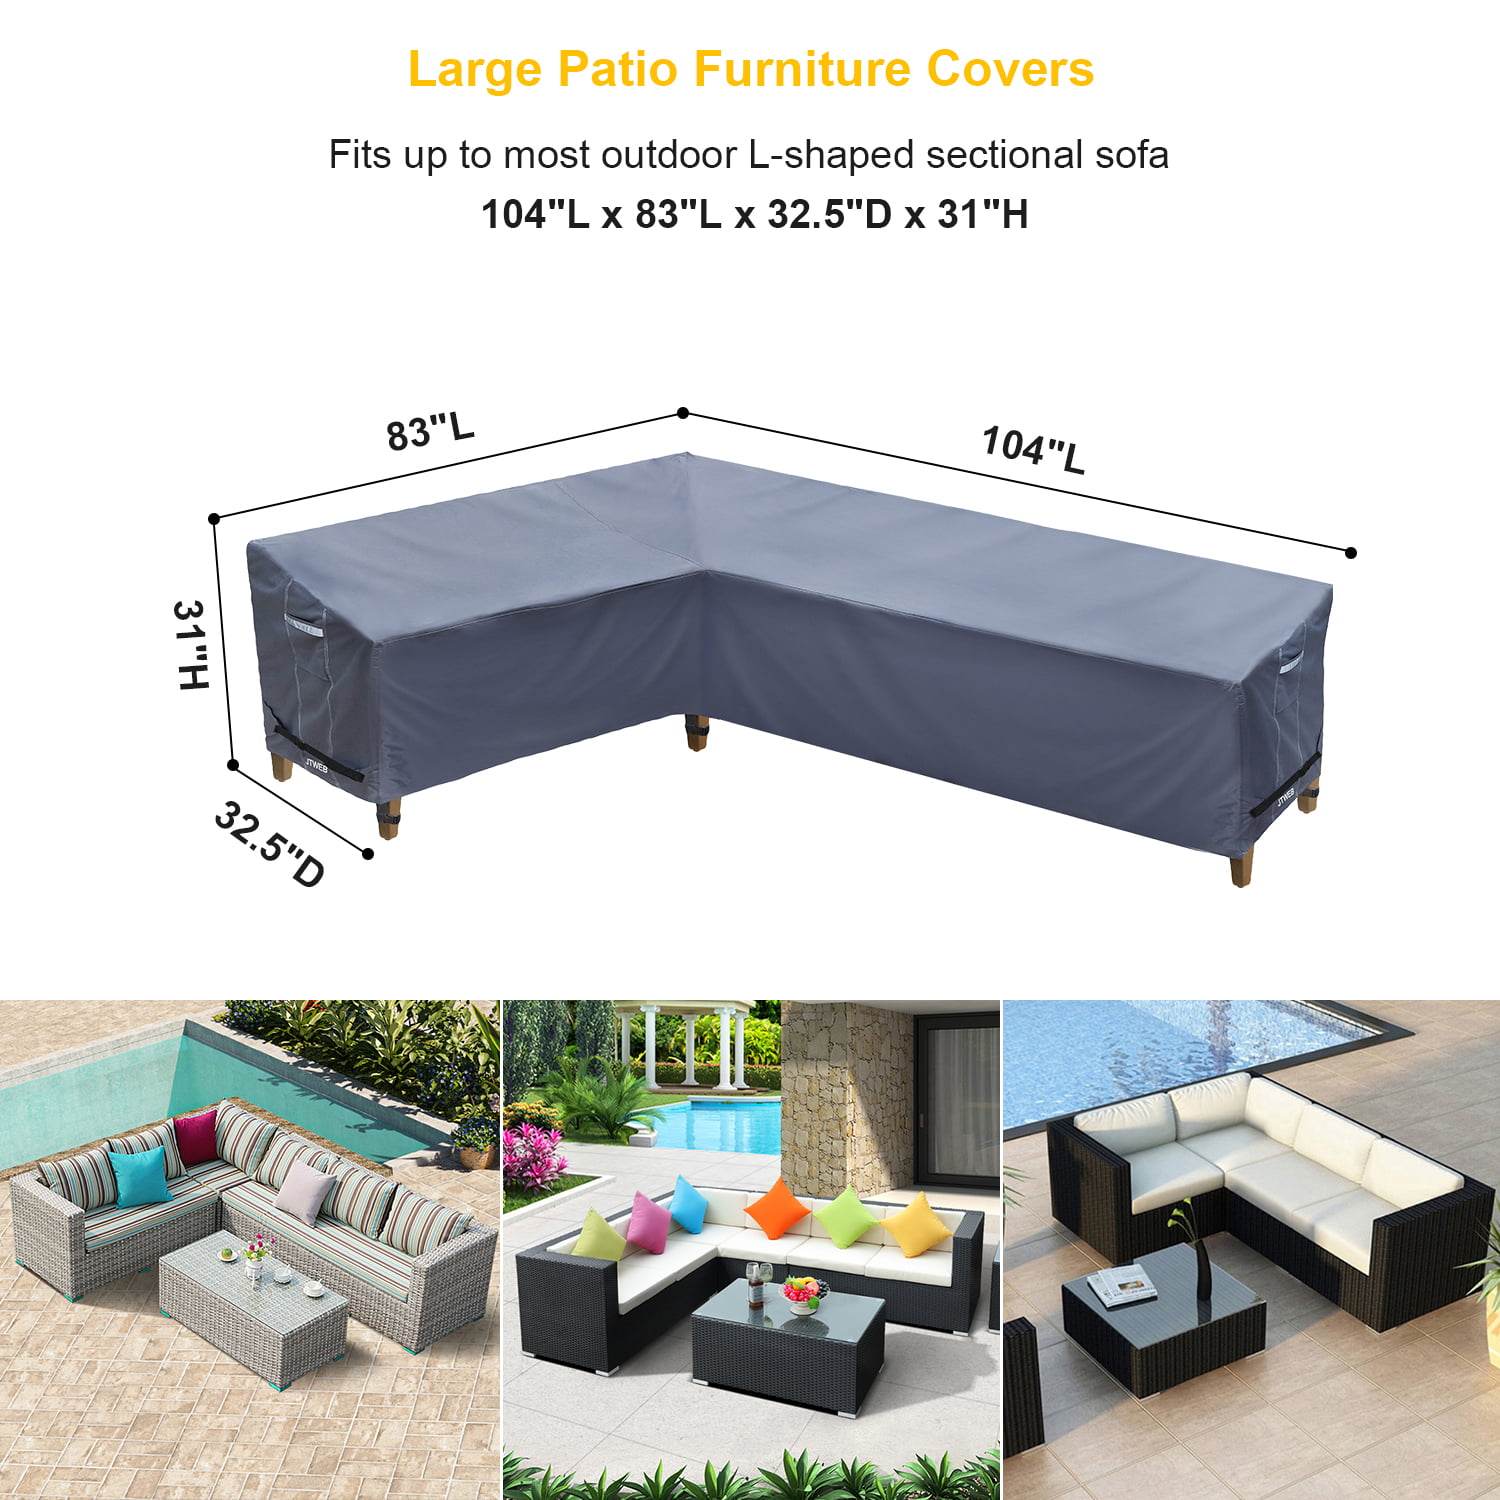 YMBASKET L Shaped Outdoor Furniture Cover Waterproof,600D Patio Sectional Sofa Cover with Air Vent,Outdoor Couch Cover,Patio Sectional Cover,83x 104L x 32 D x 31 H-Left Facing